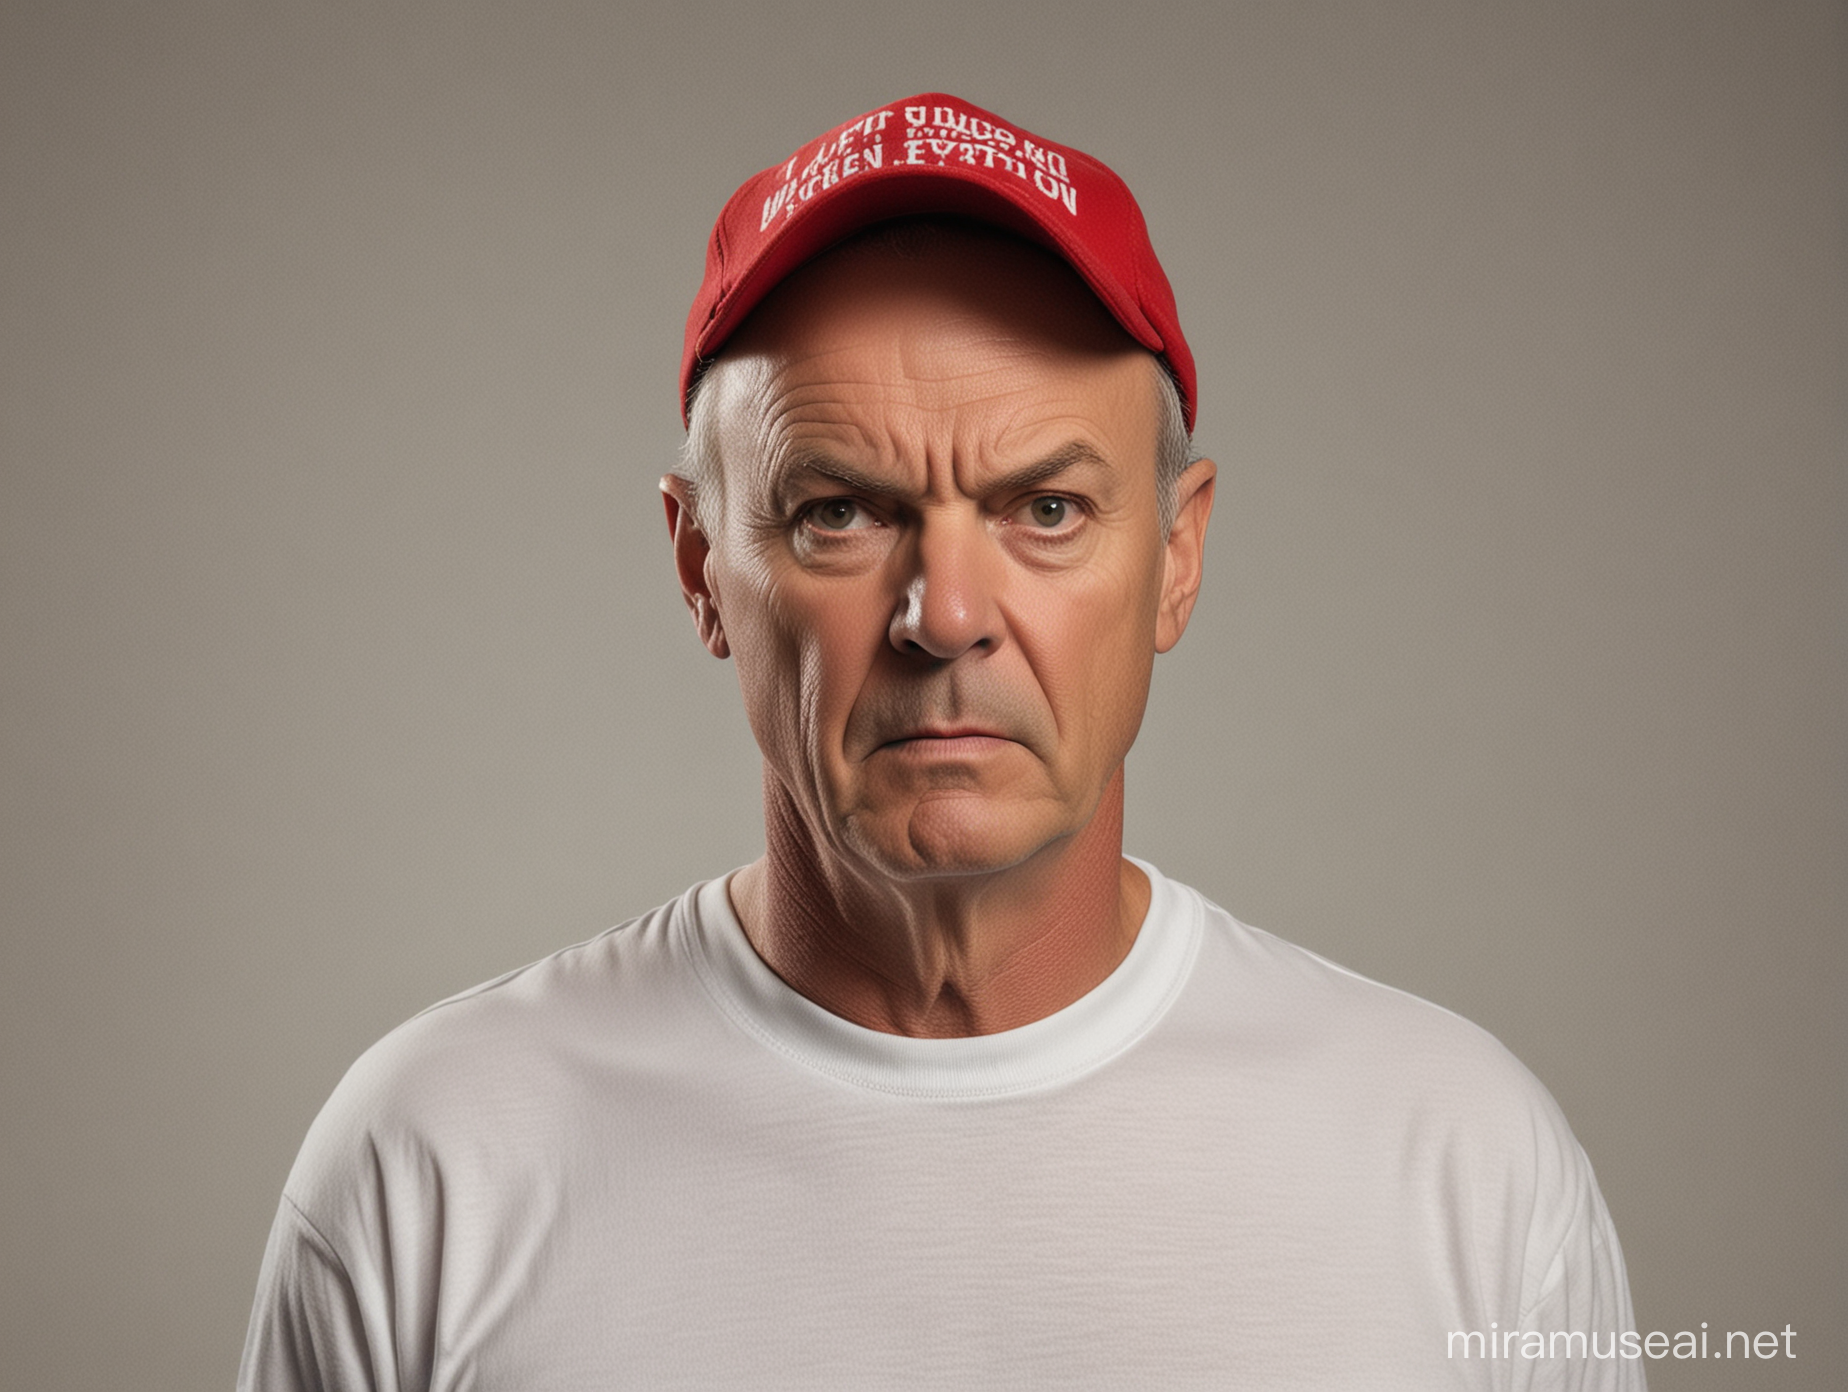 A angry old white man who looks like Micheal Keaton with red cap wearing a white  t shirt  facing forward  
